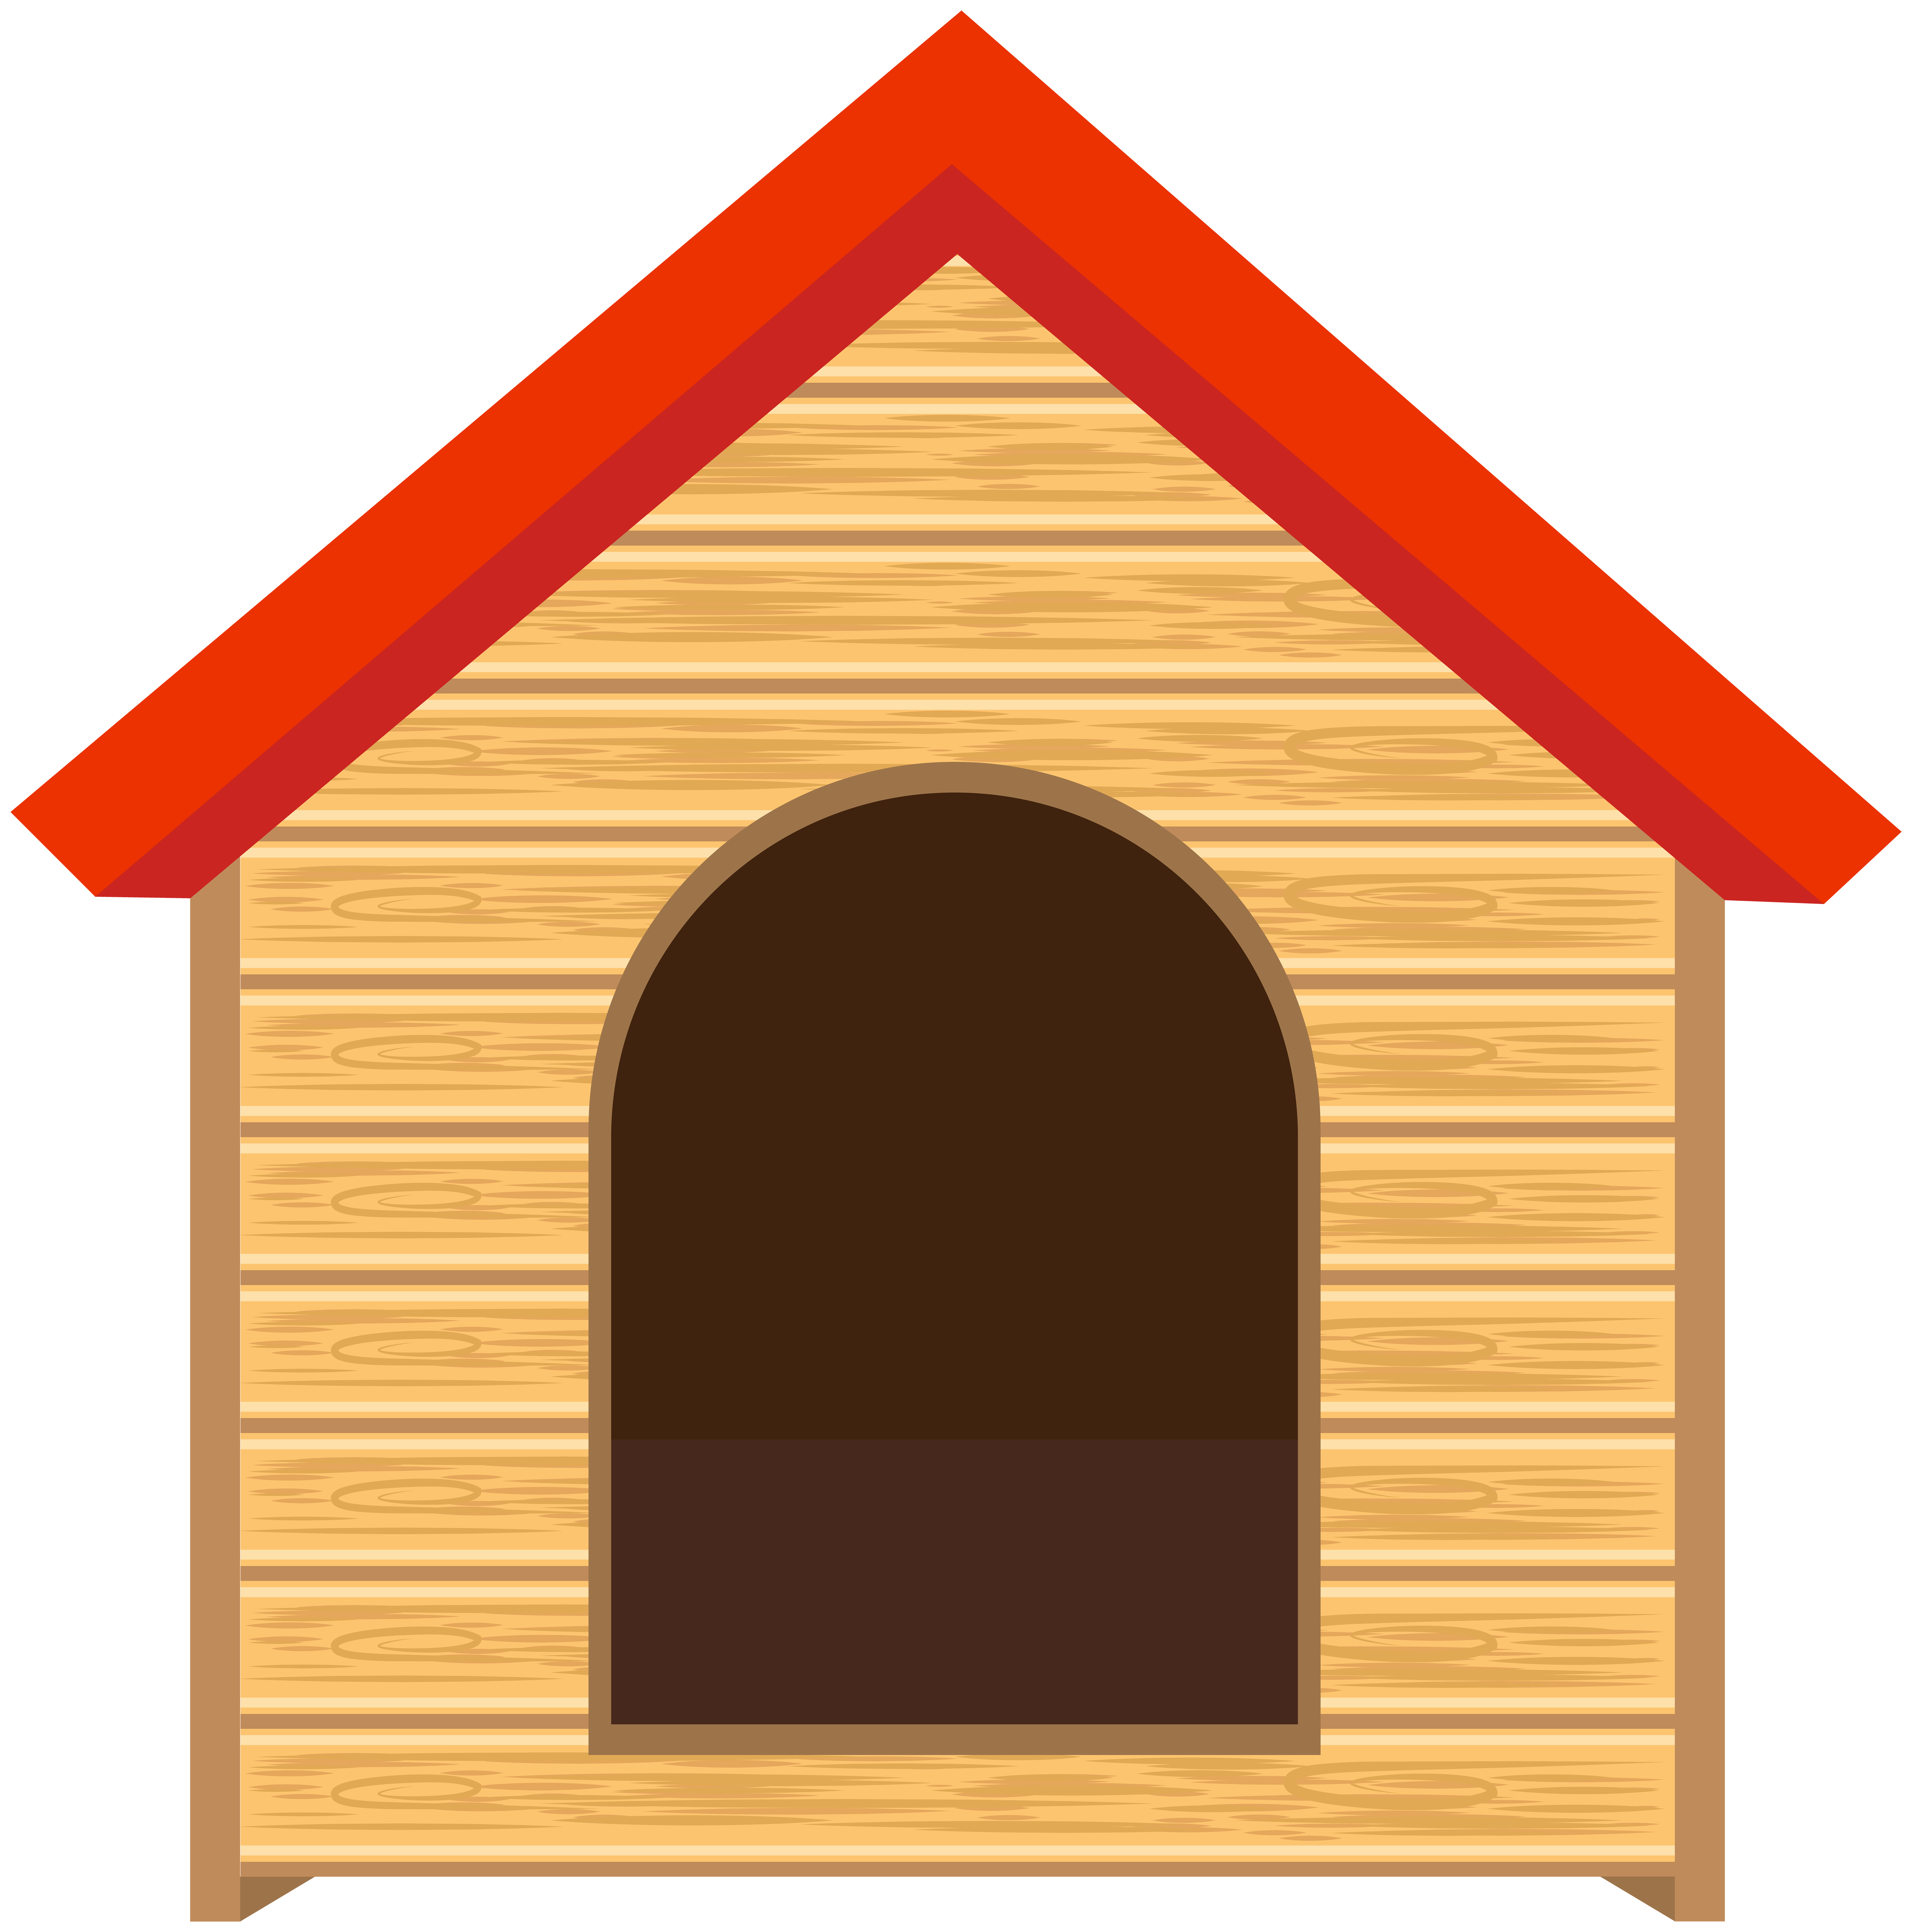 Dog Houses Clip art - Dog house png download - 7917*8000 - Free